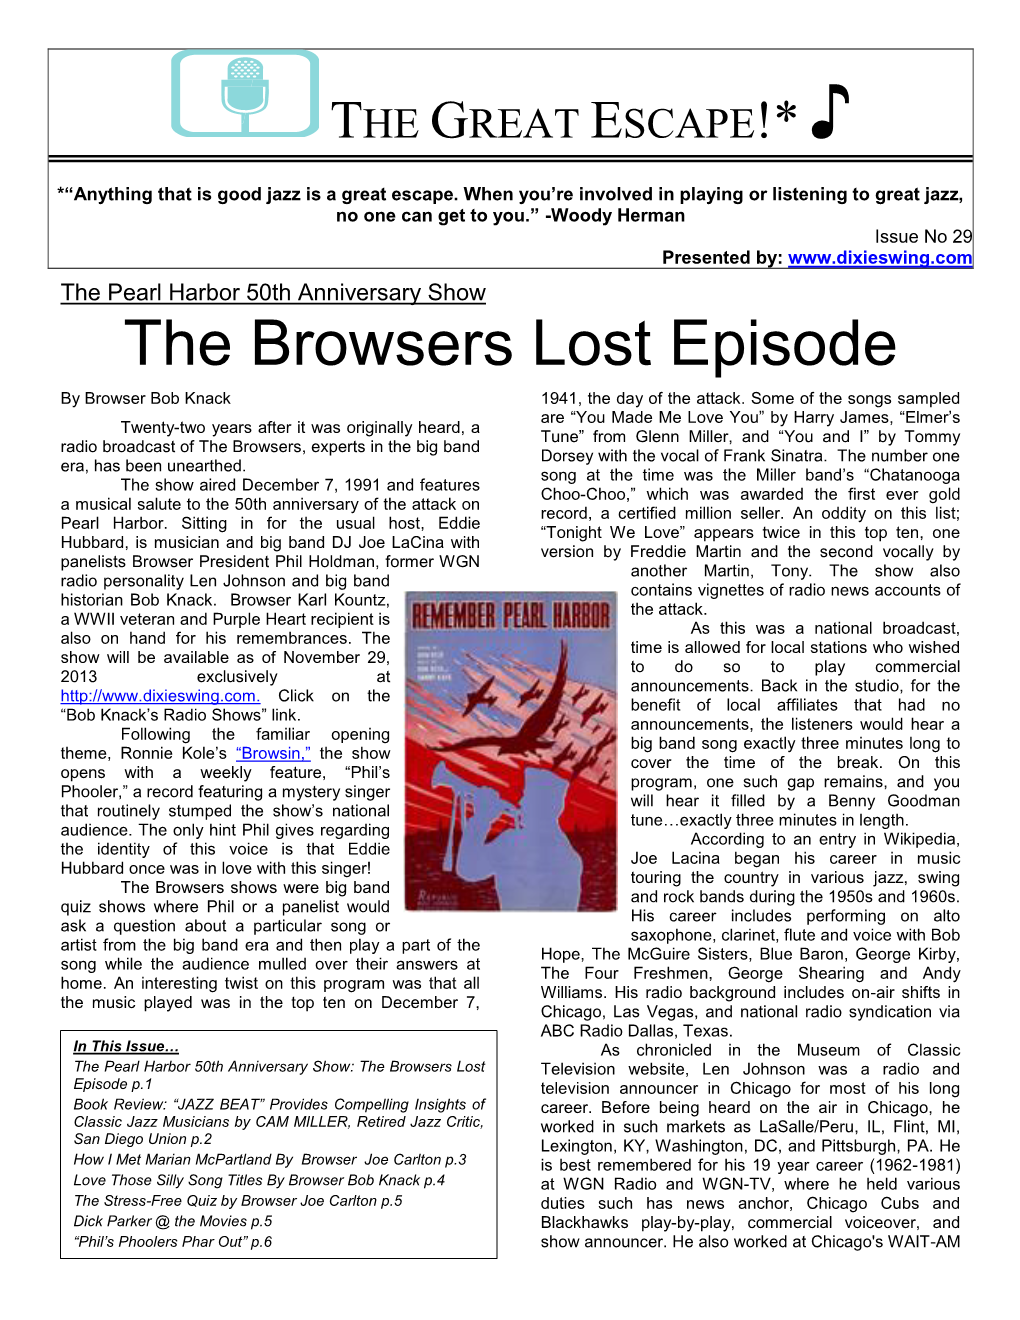 Newsletter, Created by Bob Knack and Friends, Remembers the Browsers on the SMN Network and Contains Articles for All Aficionados Might Play a Little